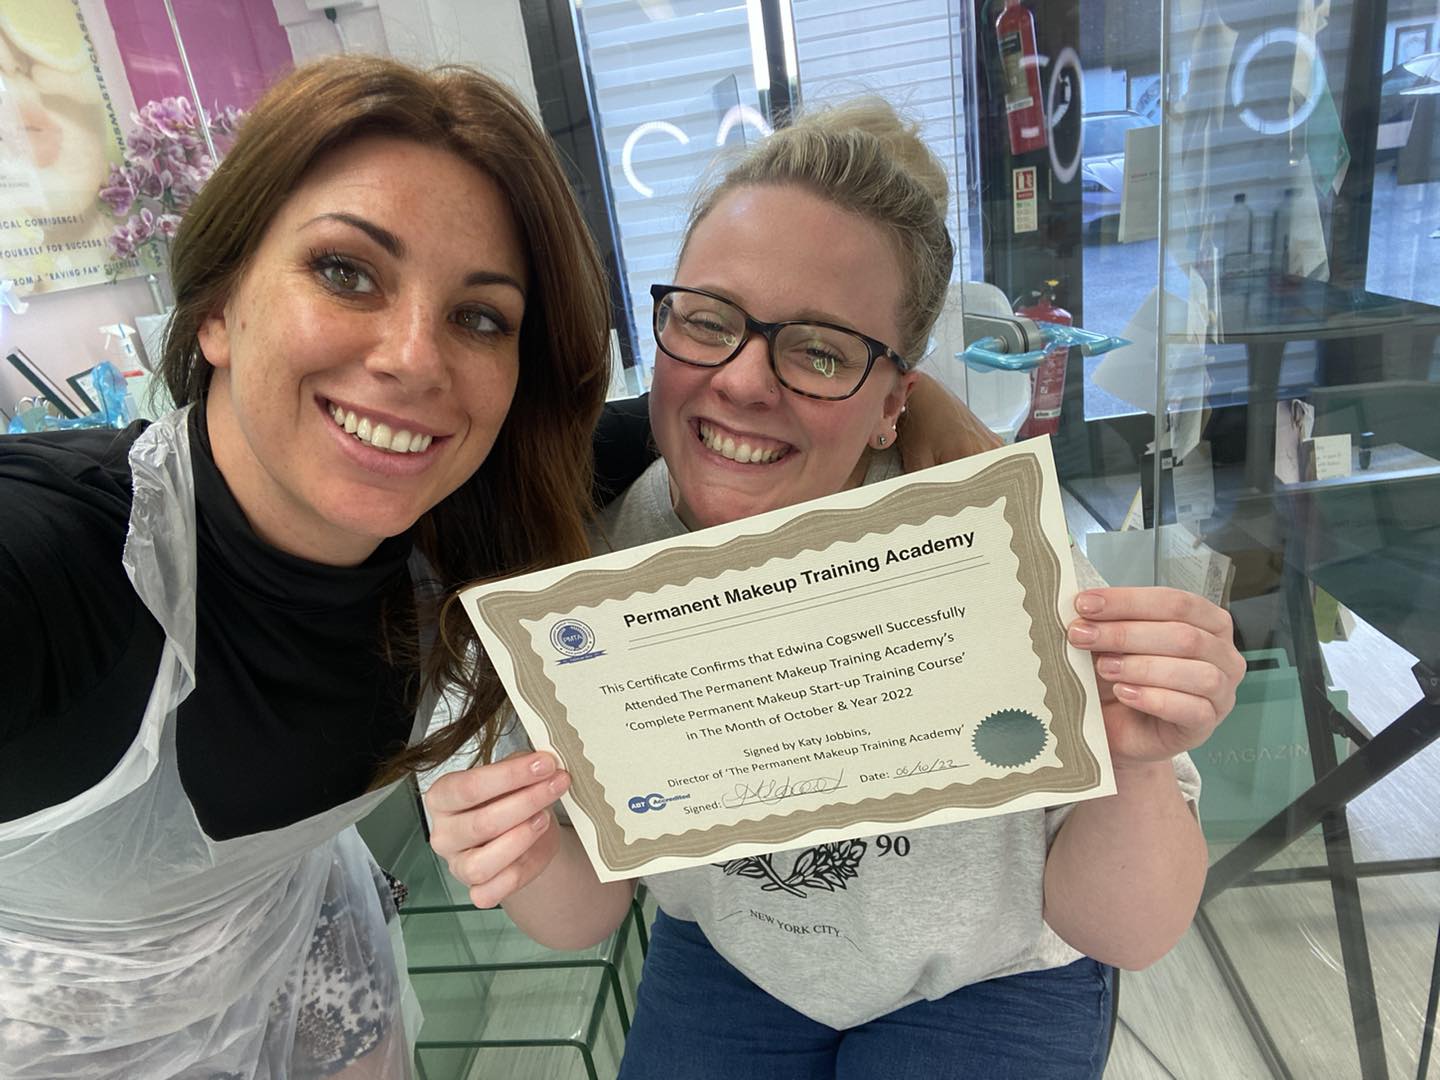 Edwina with her Permanent Makeup Training Certificate